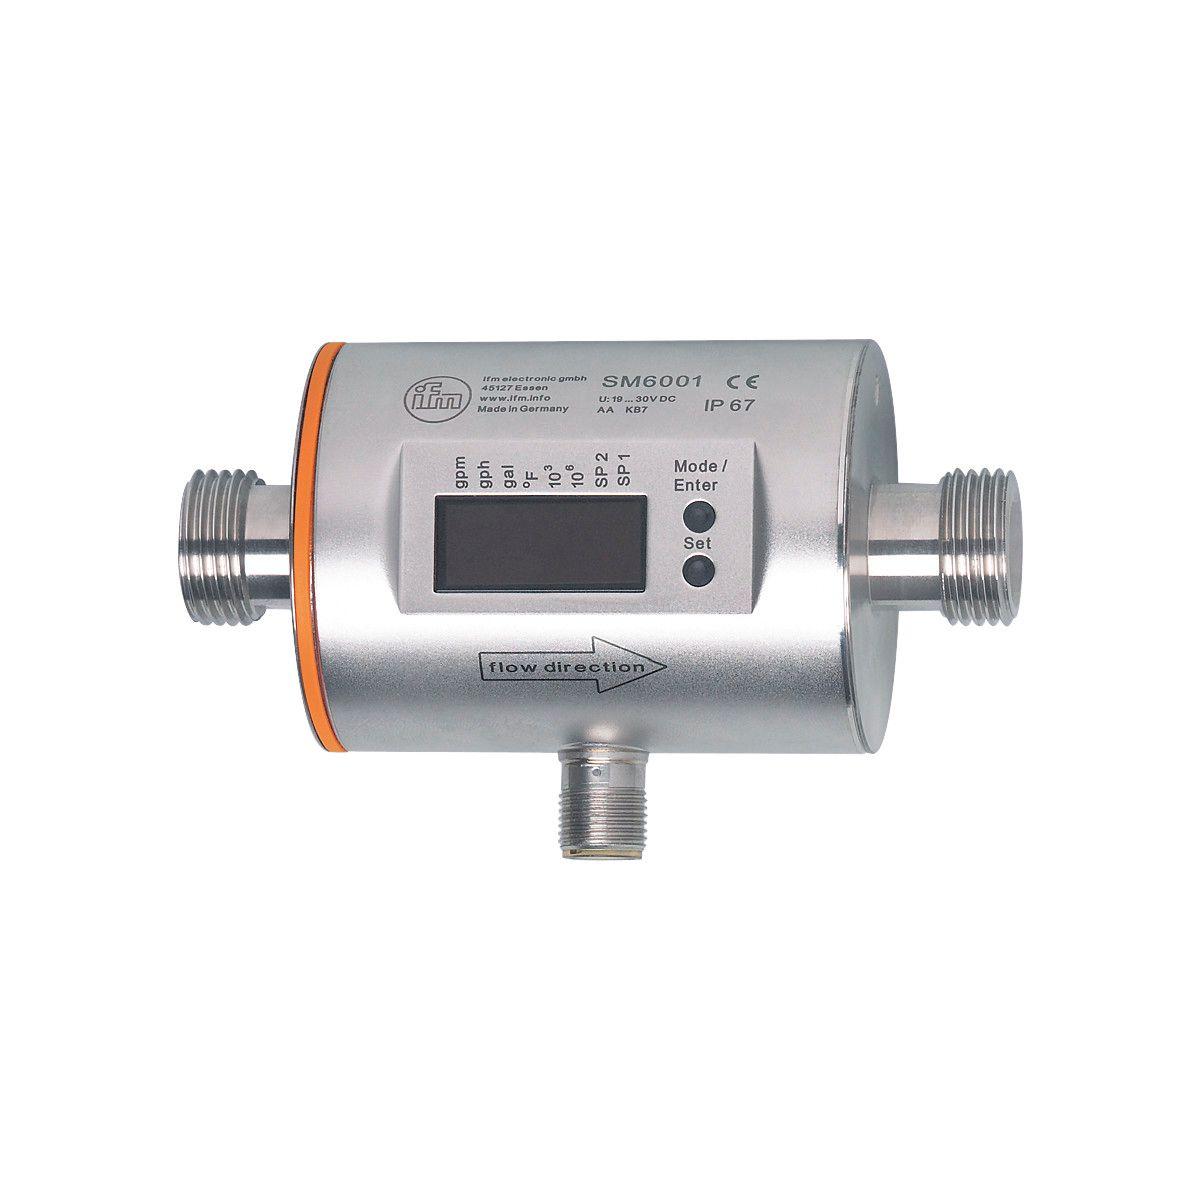 ifm Electronic SM6001 Magnetic-inductive flow meter, Number of inputs and outputs: Number of digital outputs: 2; Number of analog outputs: 1, Measuring range: 1.5...396 gph 0.03...6.6 gpm, Process connection: threaded connection G 1/2 DN15 flat seal, System: gold-plated contac